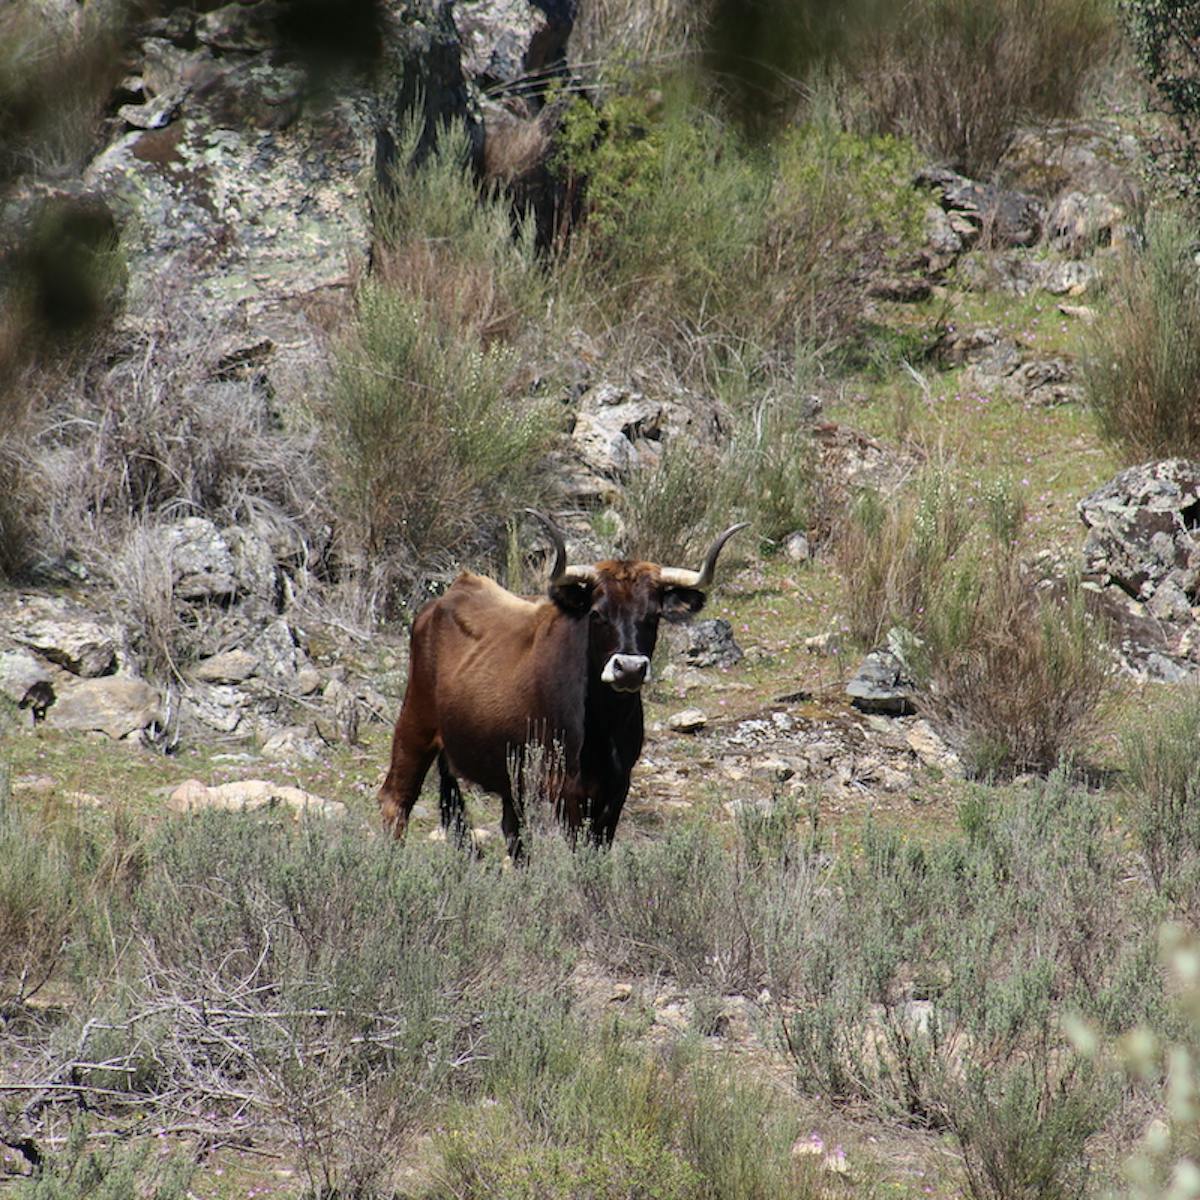 Aurochs playing a key role in rewilding, in the north of Portugal